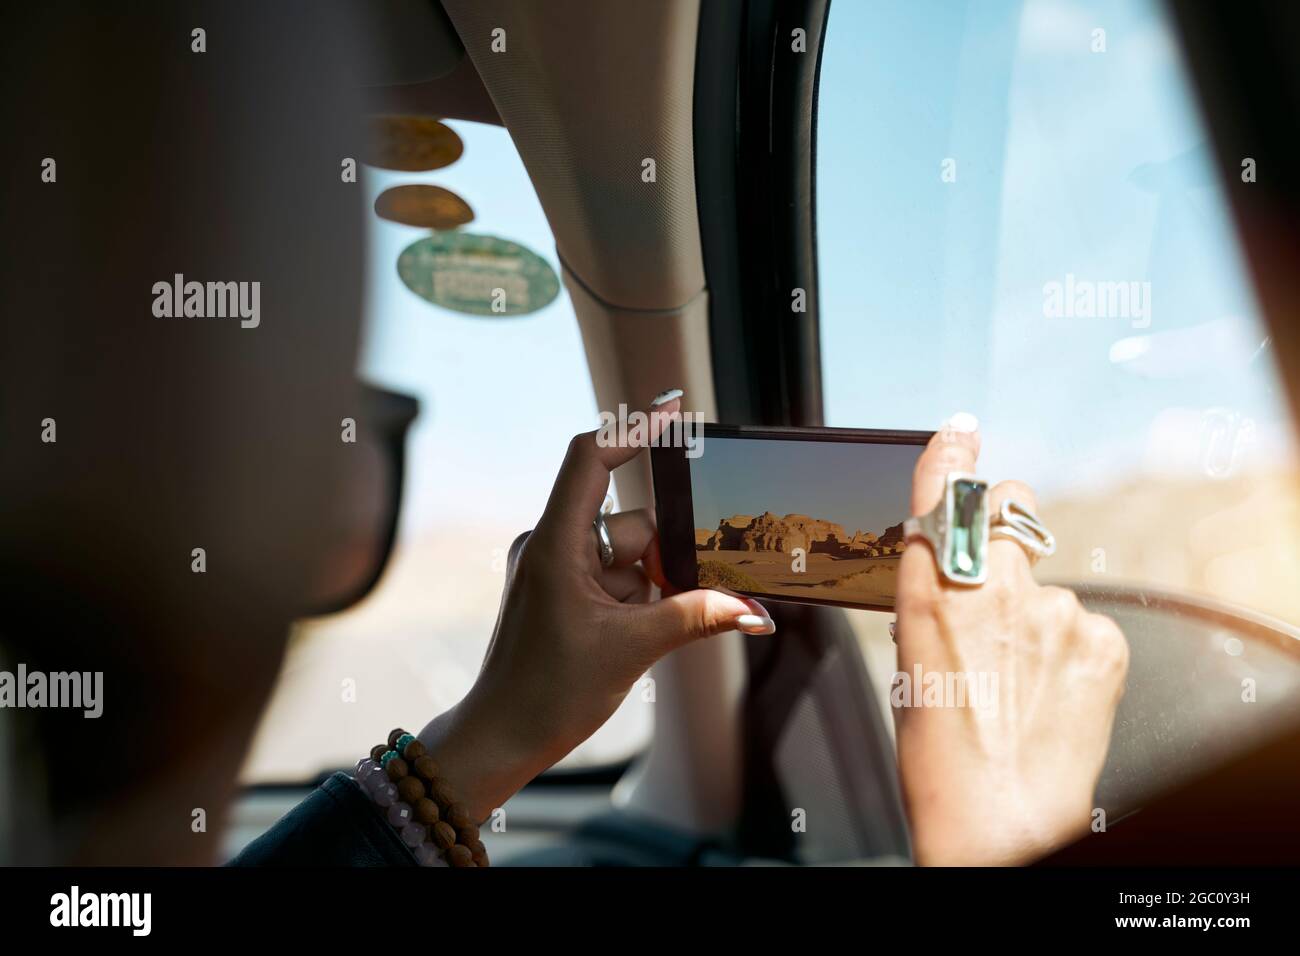 asian female tourist passenger taking a photo using cellphone from inside of a car Stock Photo